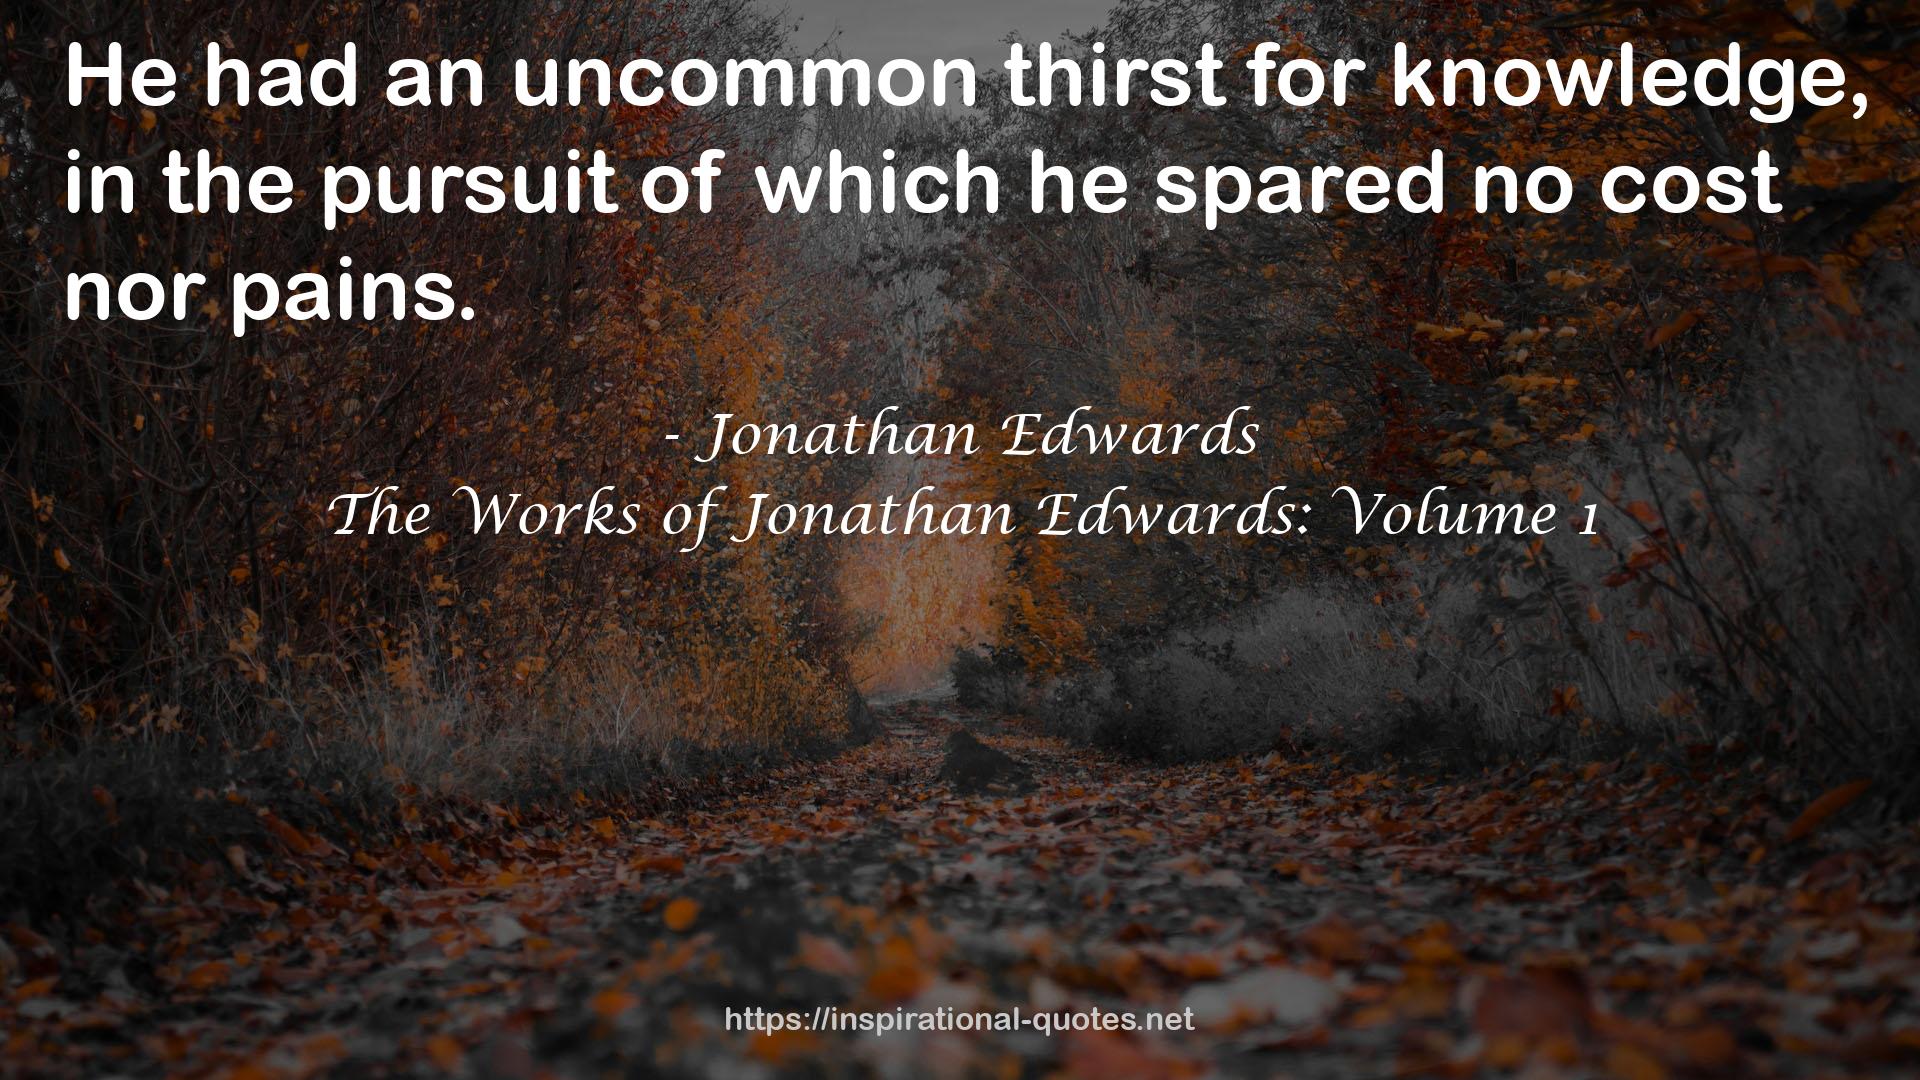 The Works of Jonathan Edwards: Volume 1 QUOTES